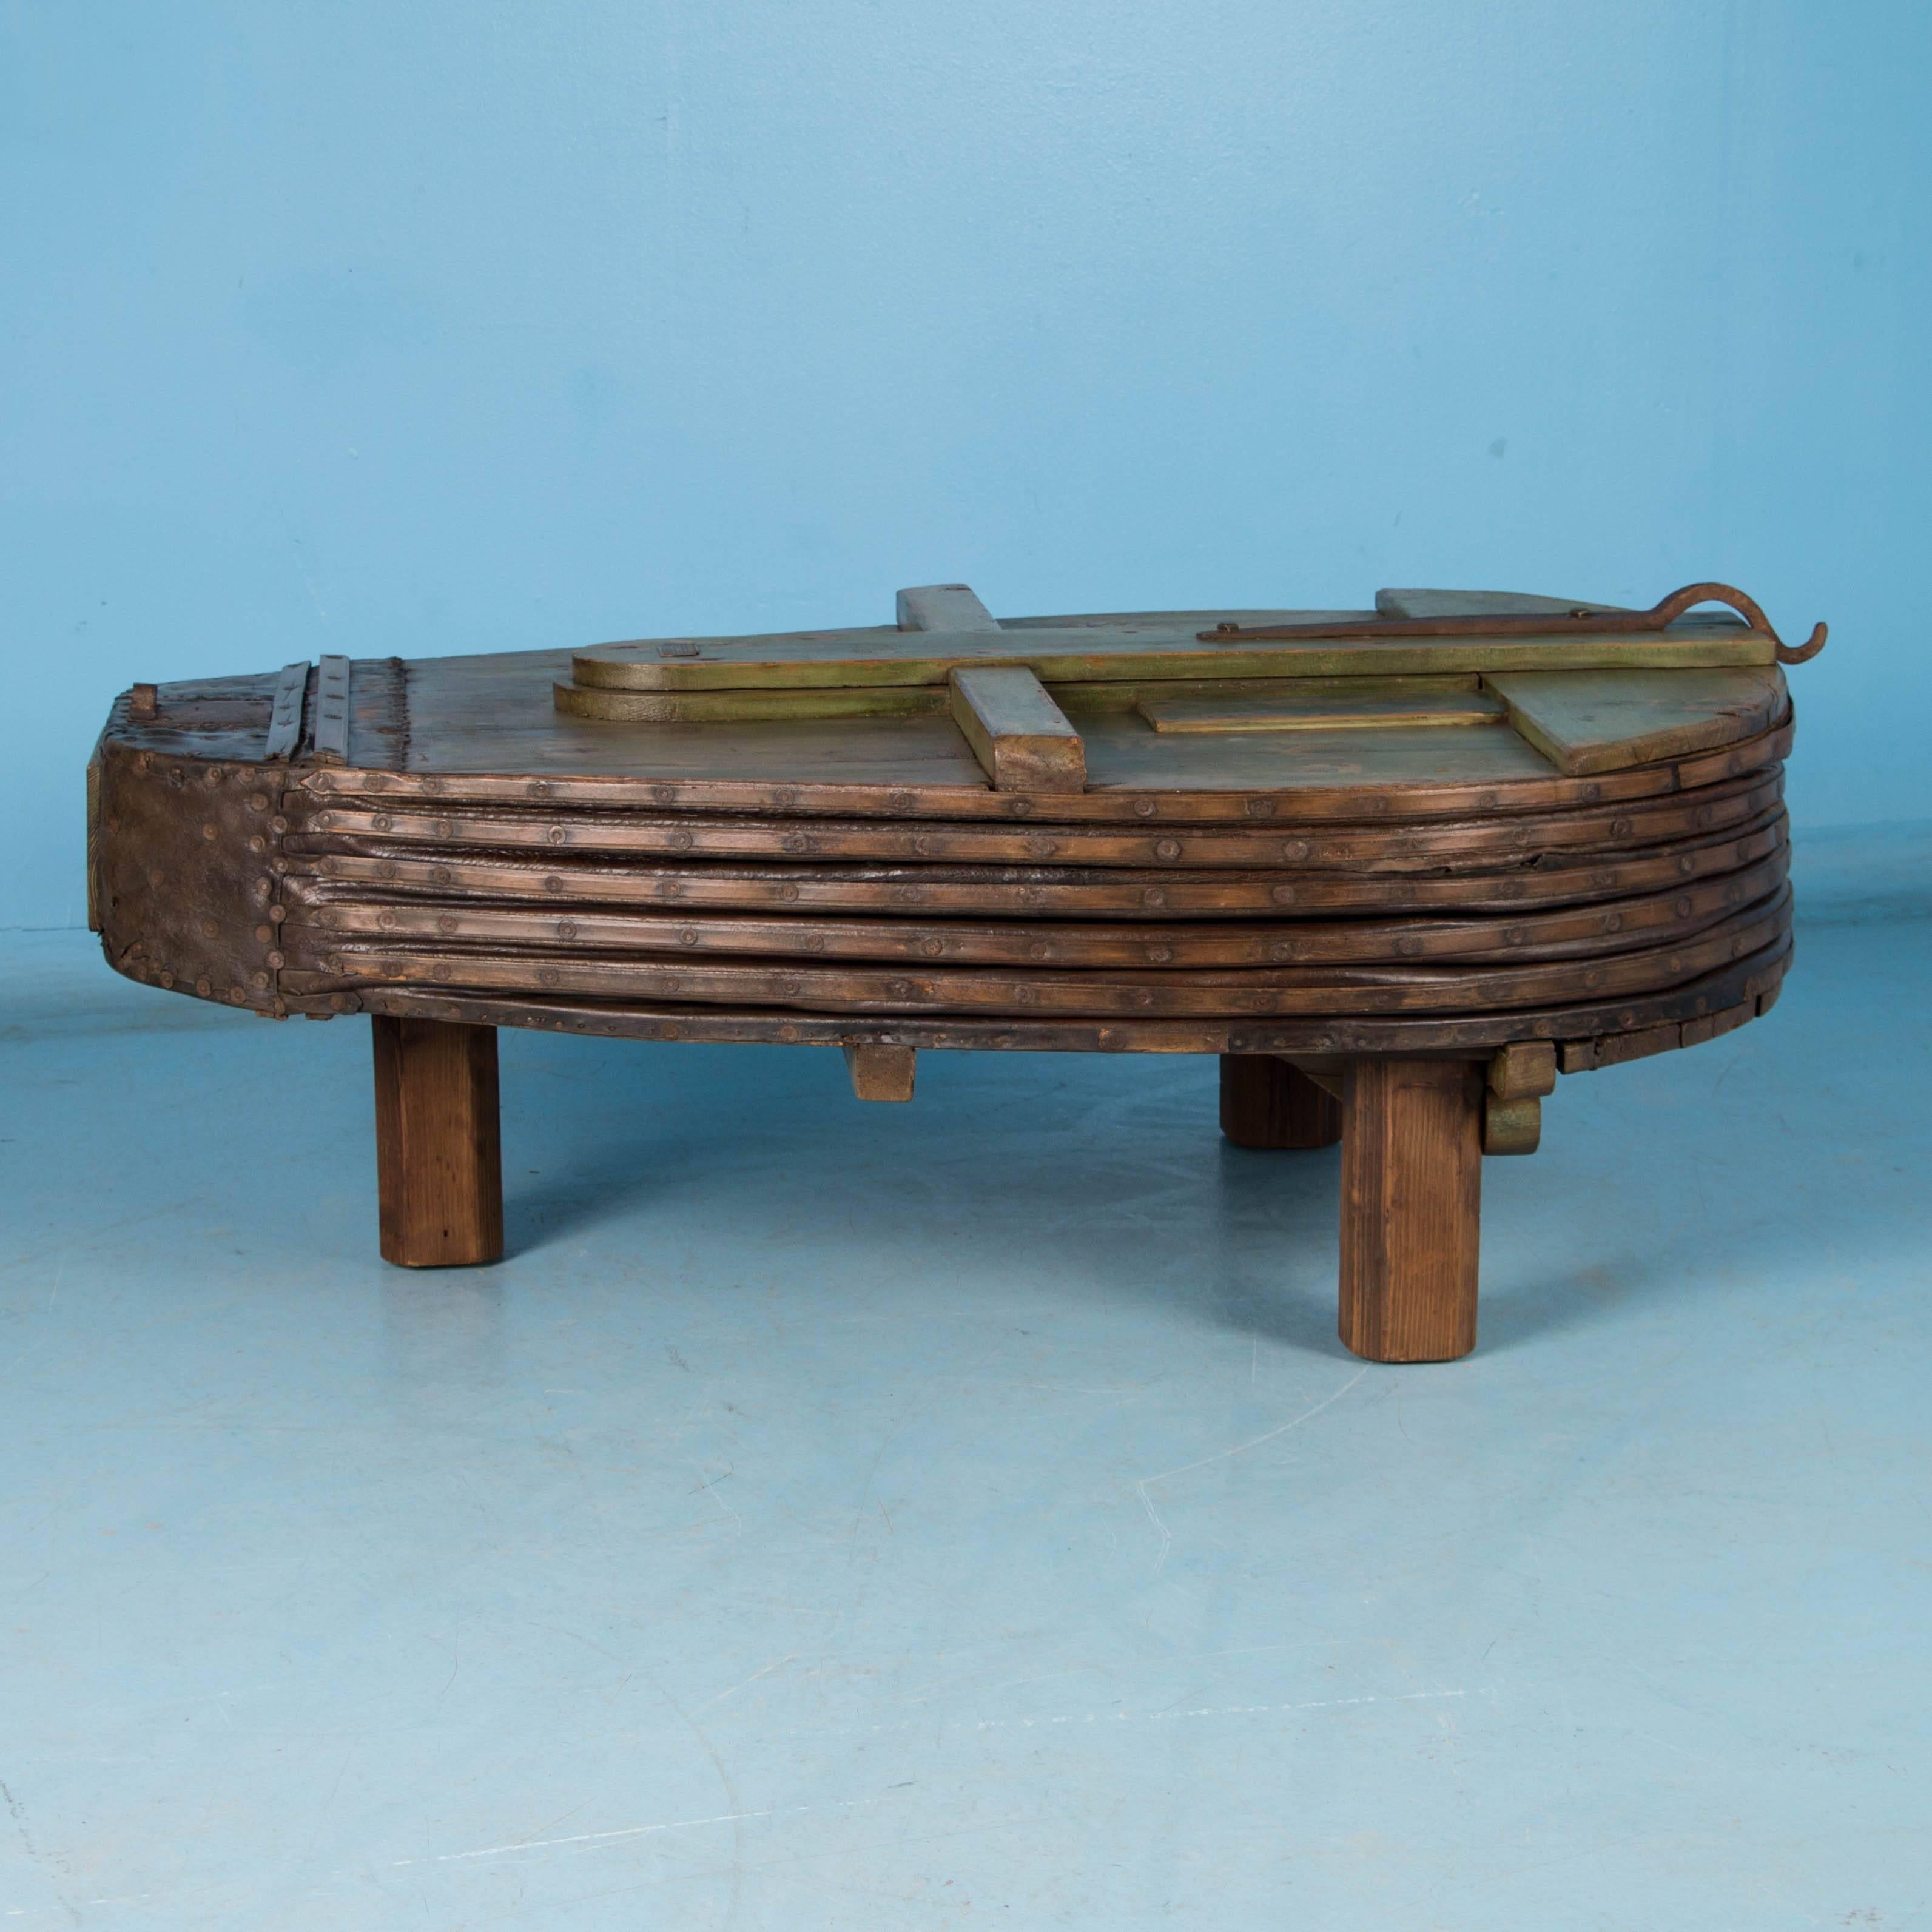 This highly unusual coffee table is made from an original antique blacksmith's bellows, and even more interesting with the original green paint still intact. It has been placed on three feet so is stable, strong and level, ready for daily use. The